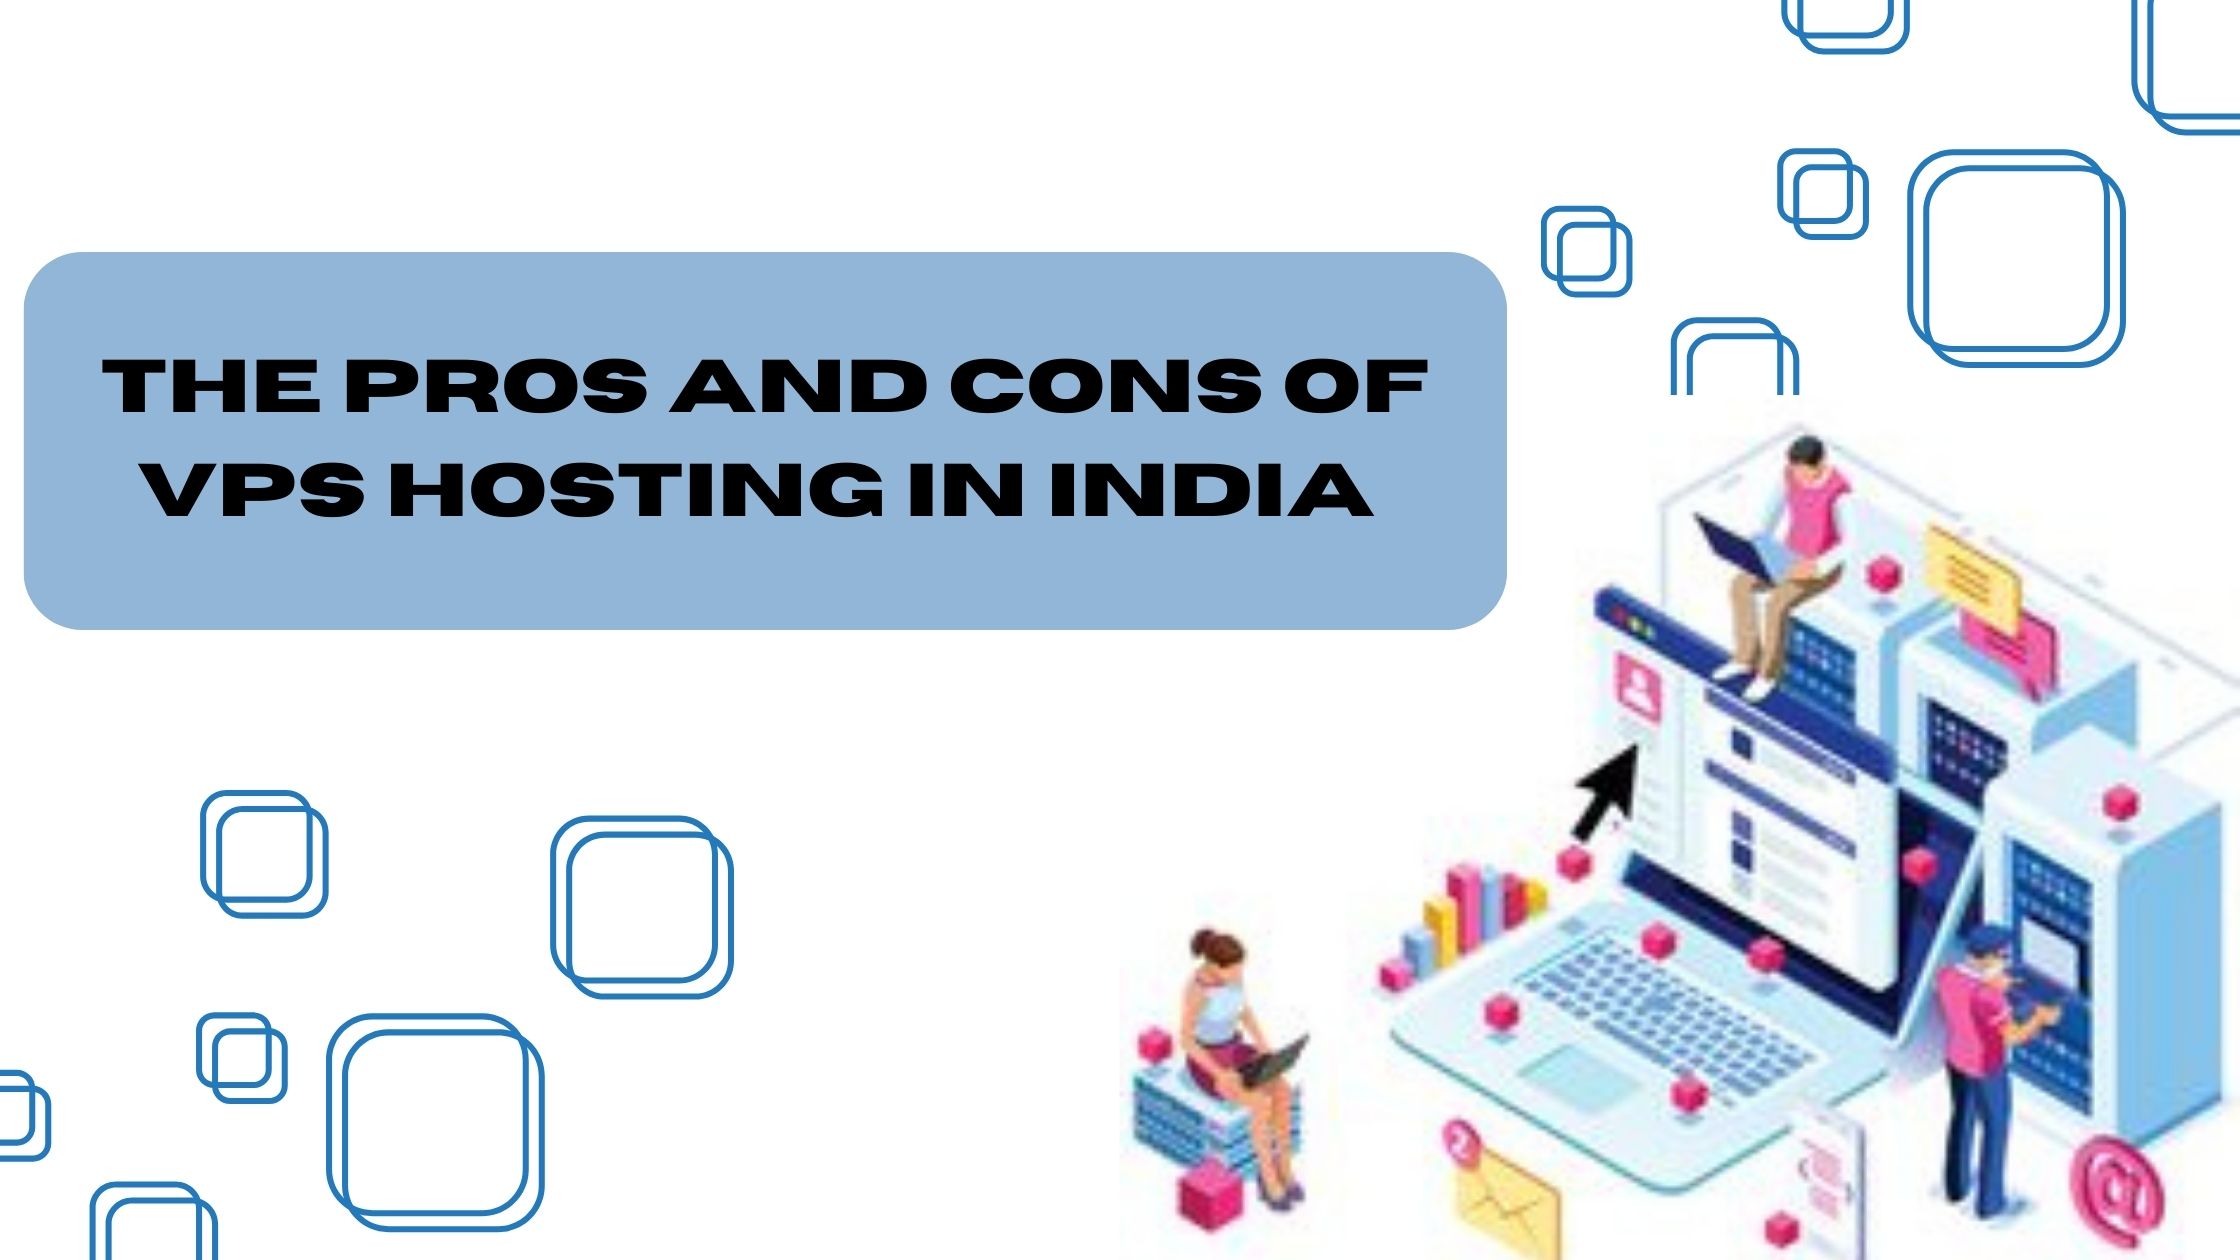 The Pros and Cons of VPS Hosting in India